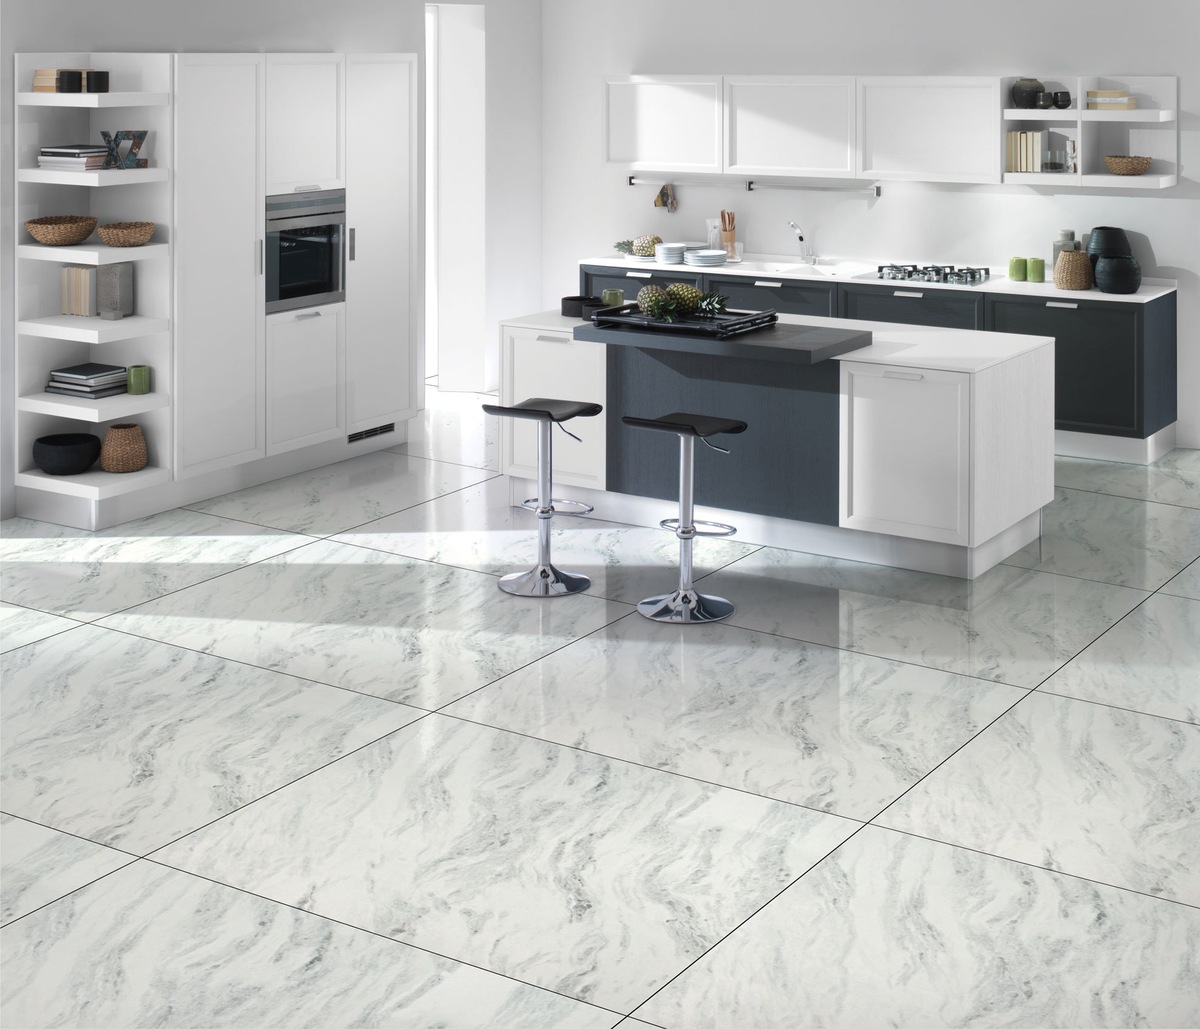 Which Kitchen Floor Tiles Are Best? Designer Know-How You’ll Want